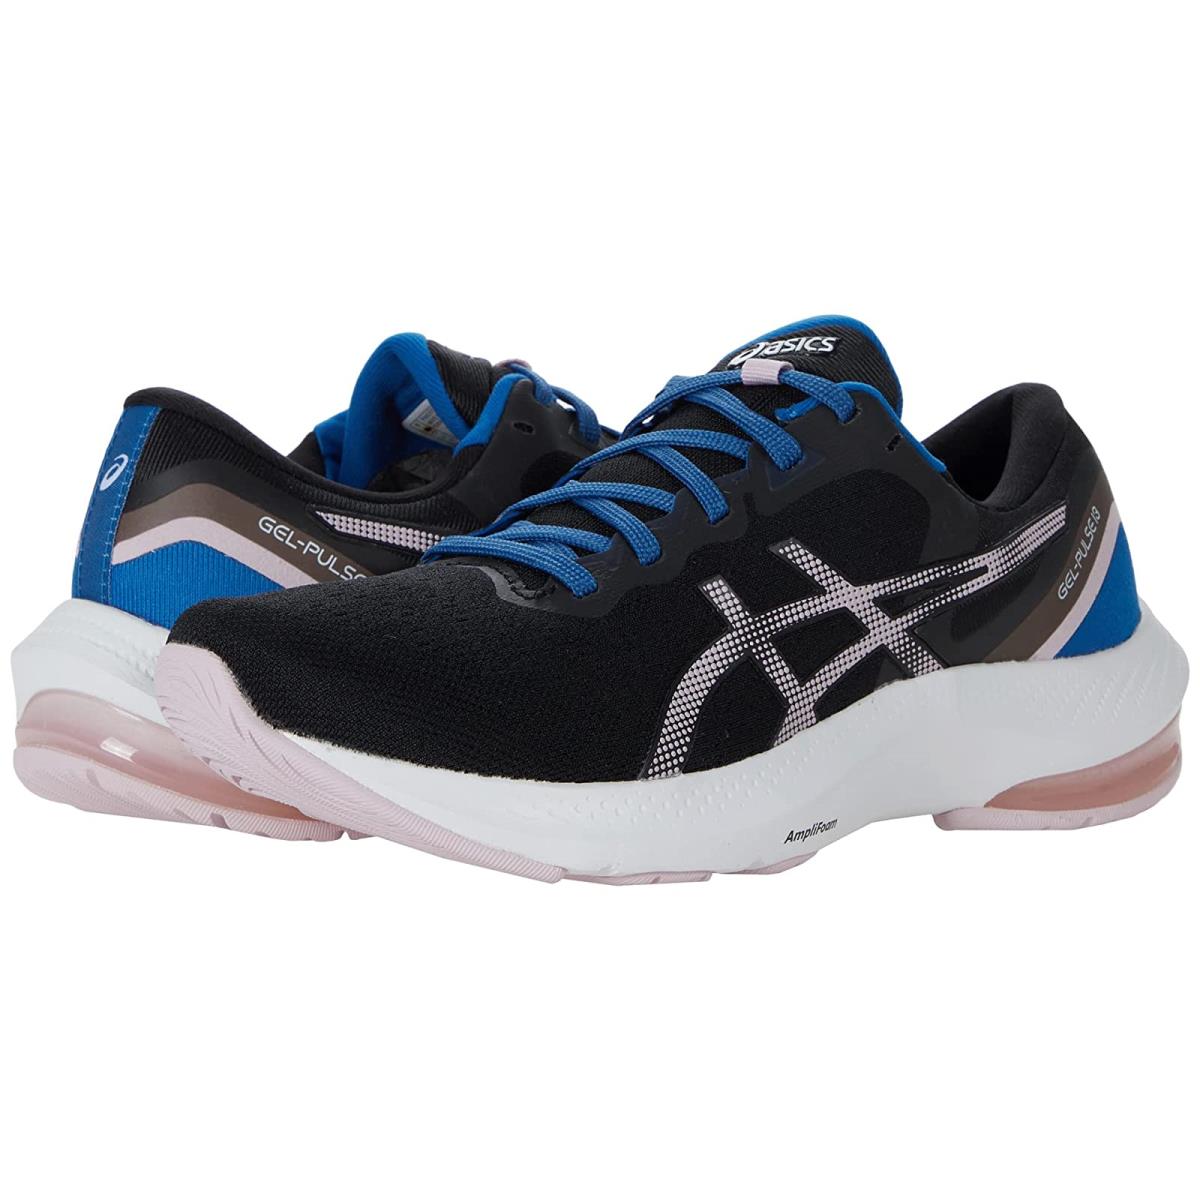 Woman`s Sneakers Athletic Shoes Asics Gel-pulse 13 Black/Barely Rose